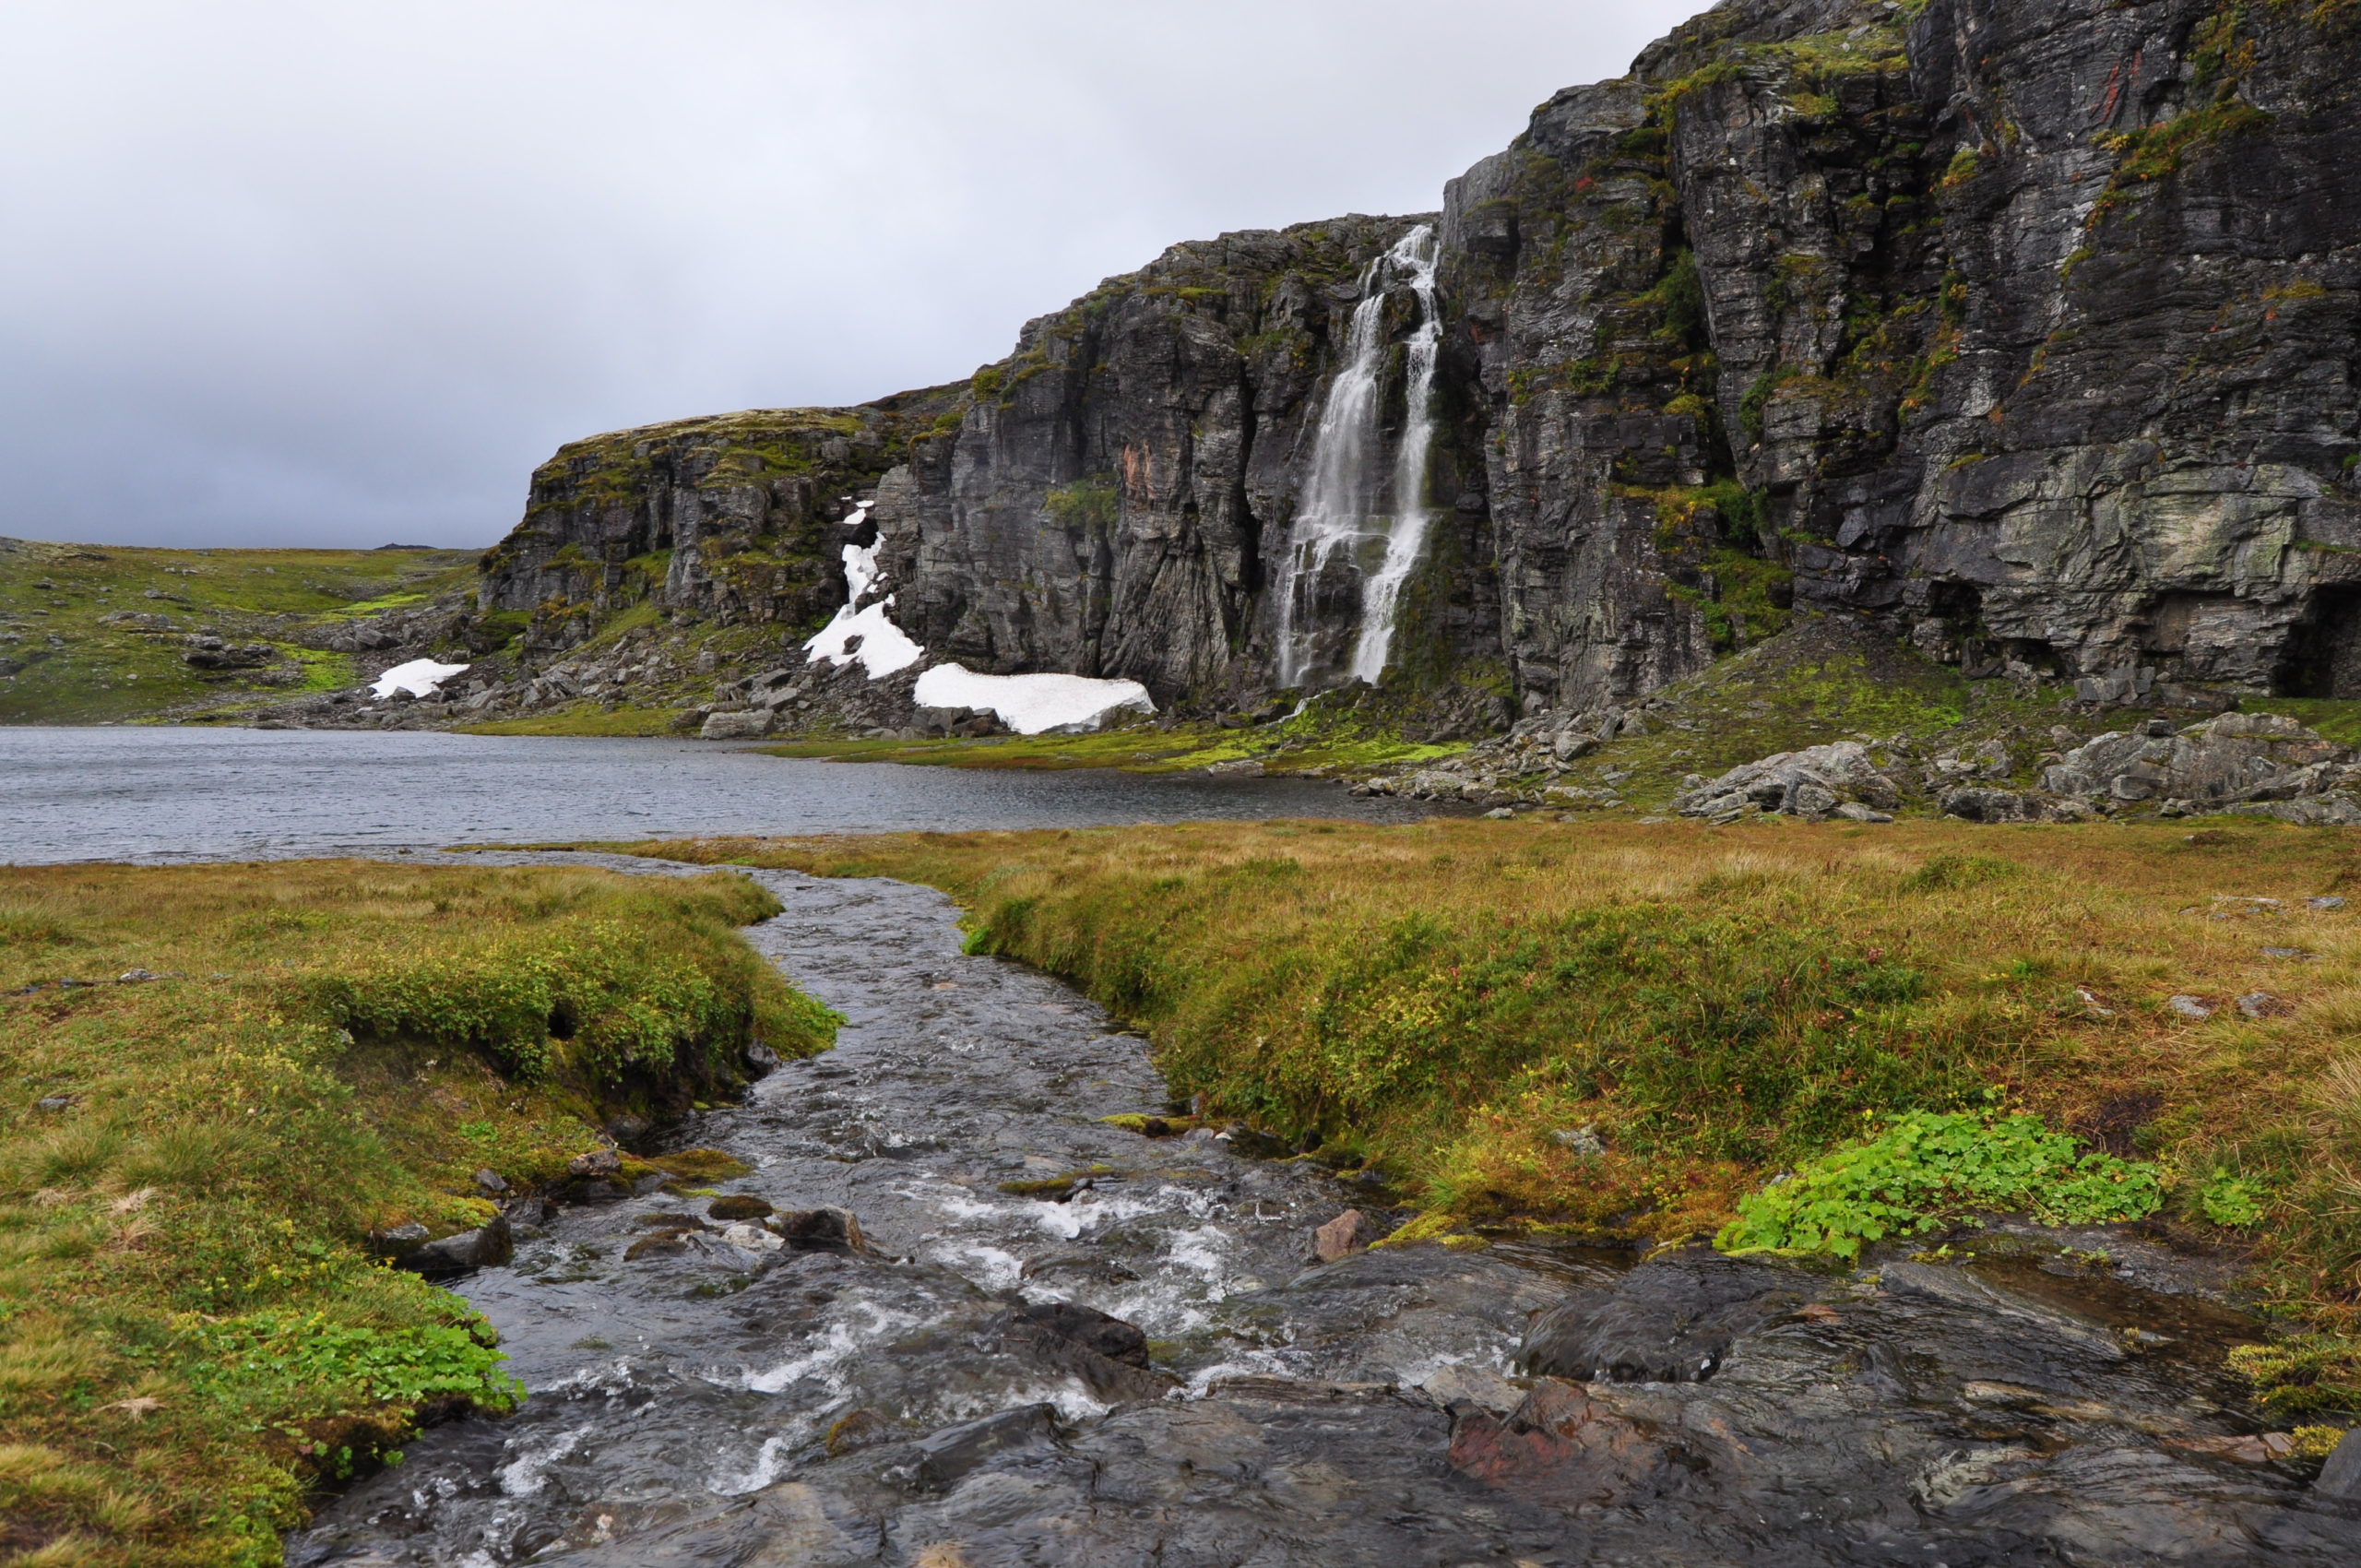 Flotvatnet, waterfall along the route of Aurlandsfjellet